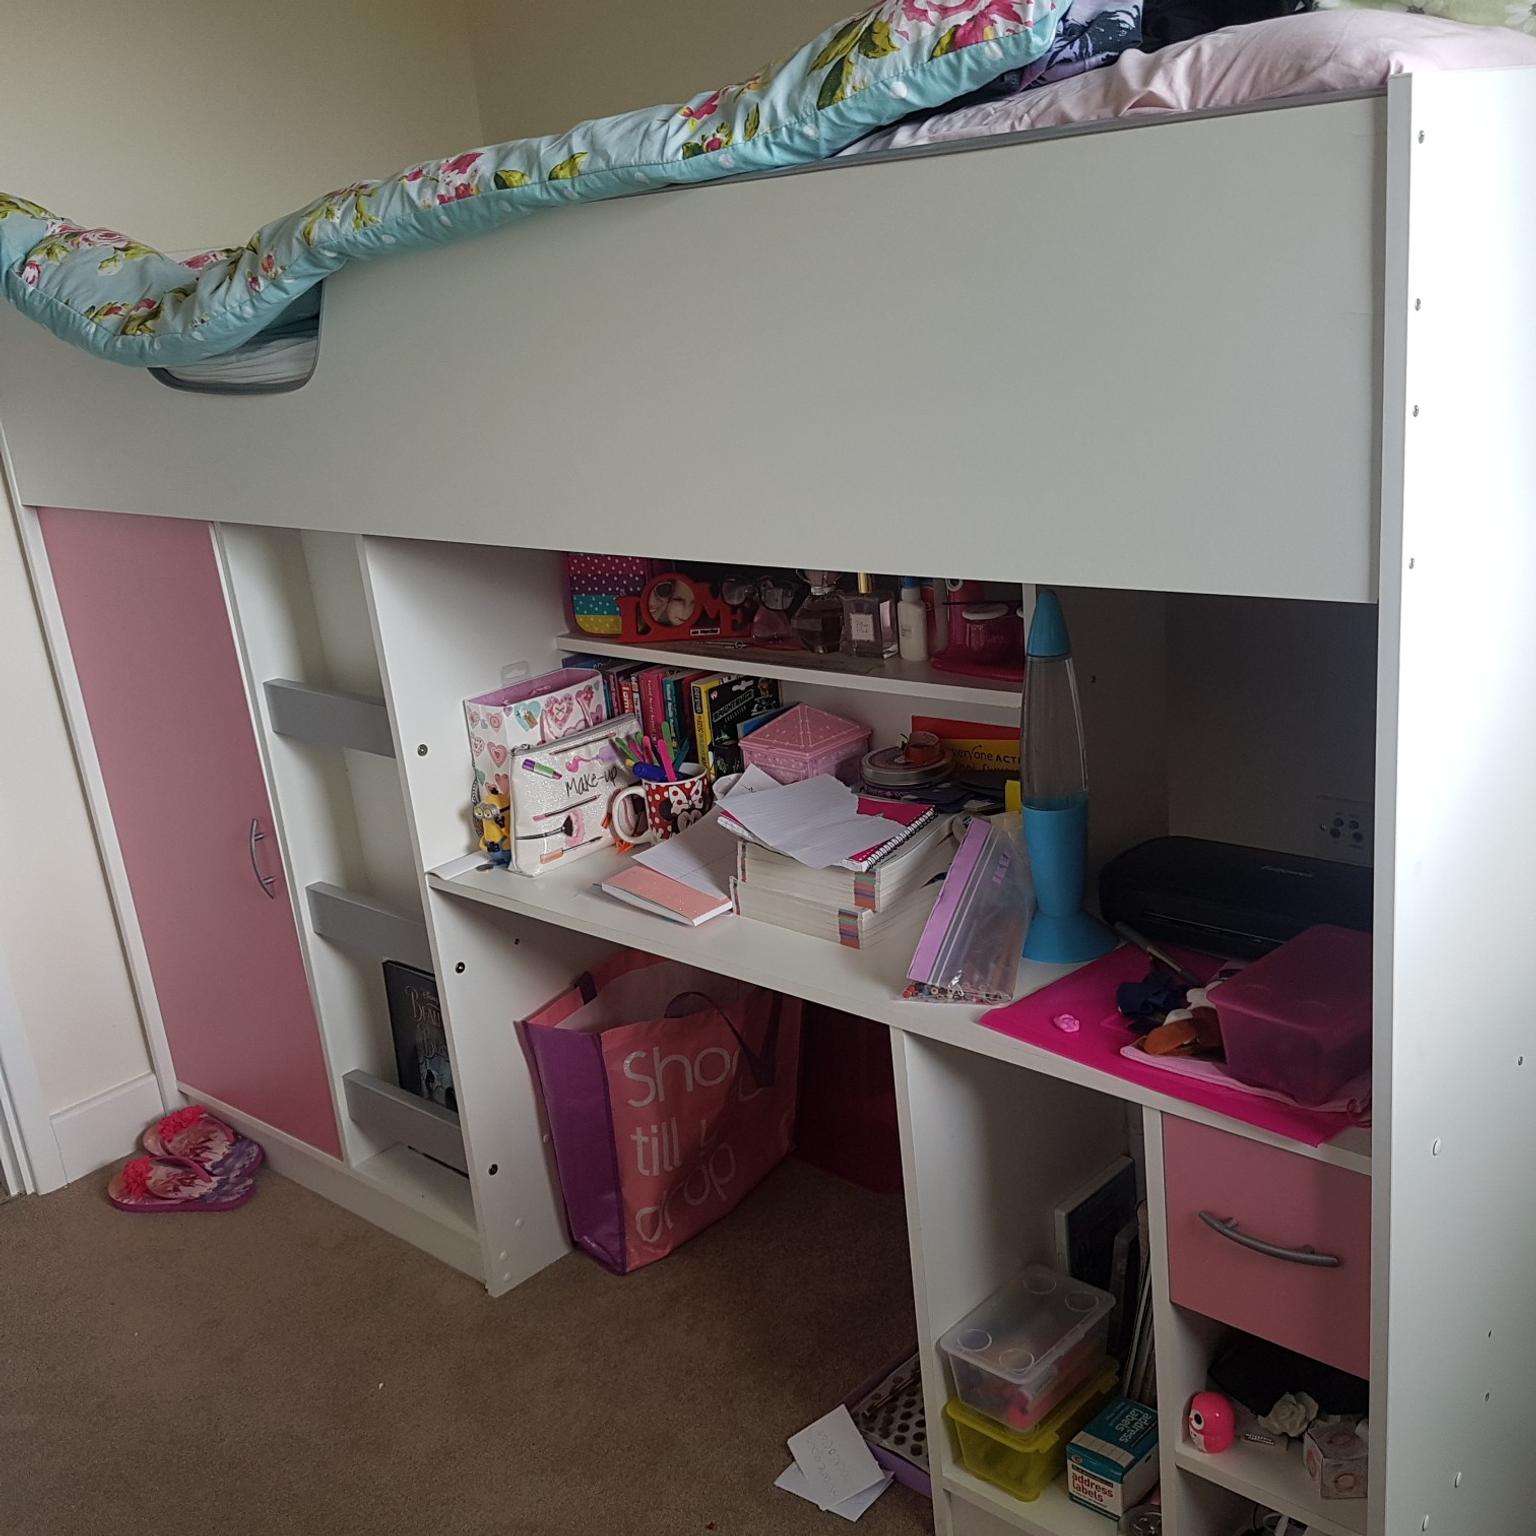 pink and white cabin bed